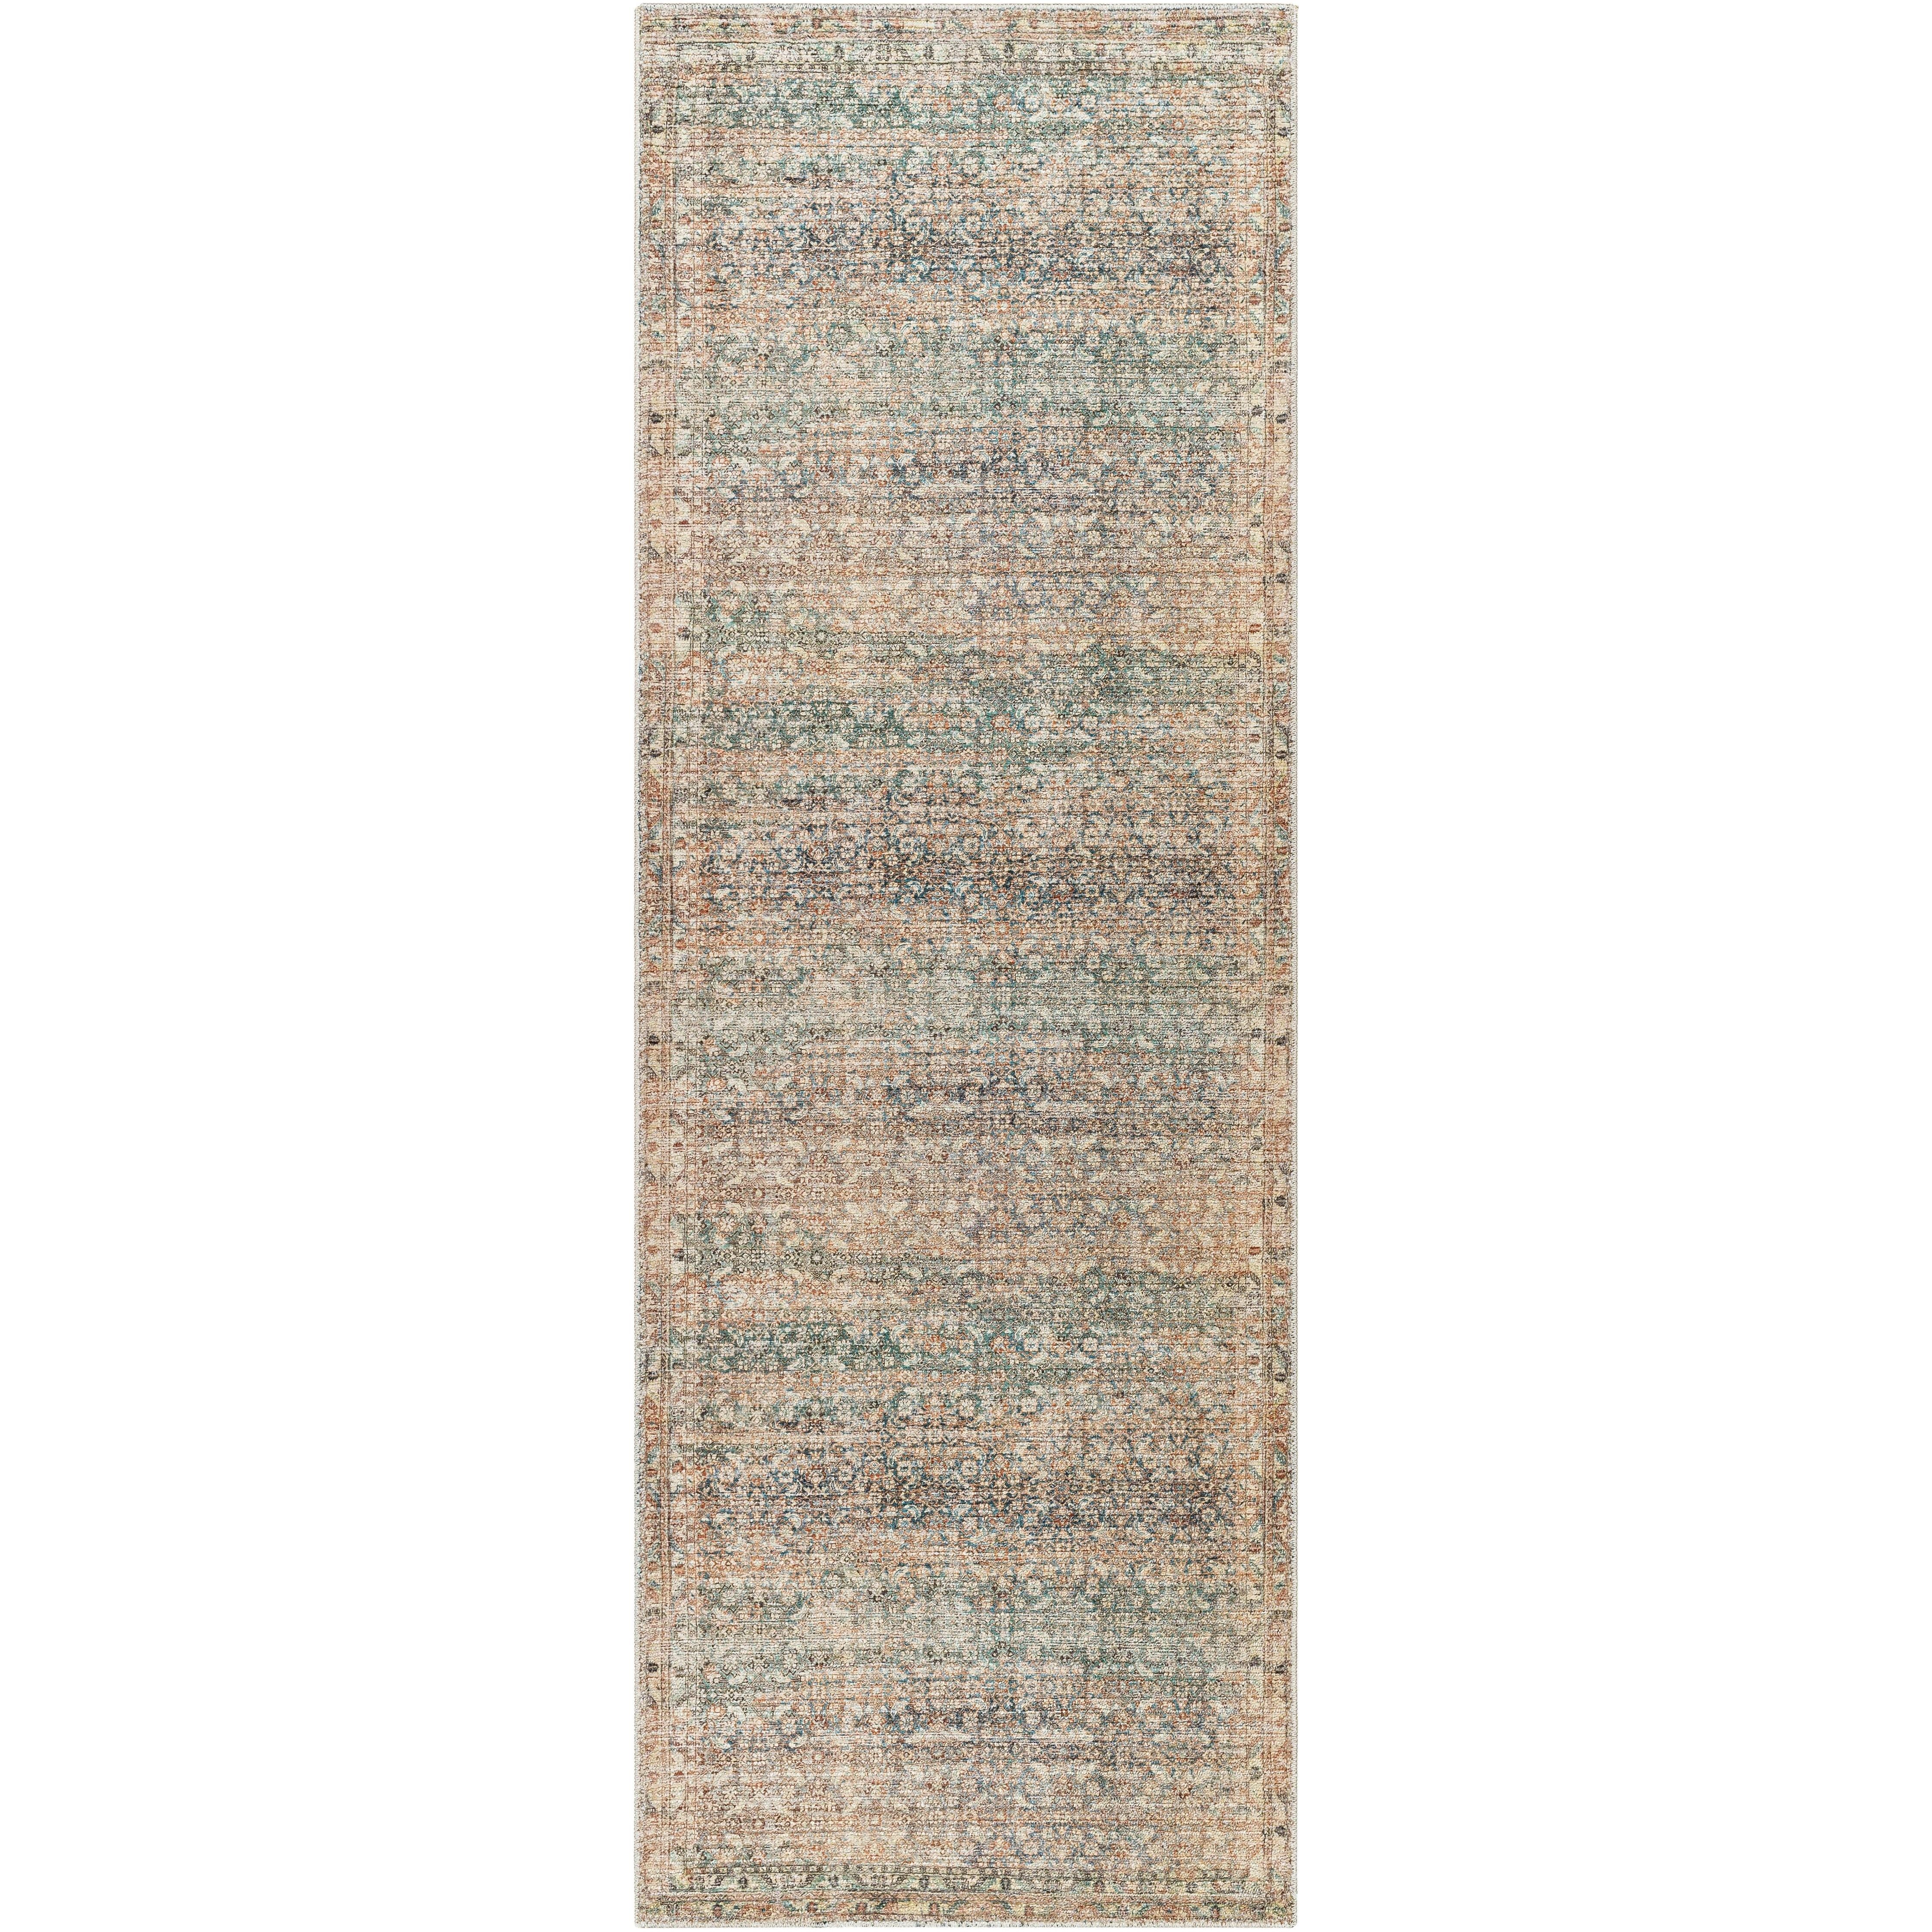 Introducing the Marlene area rug, a stunning piece from our Becki Owens x Surya line to bring you a beautiful style perfect for any space. This vintage-inspired piece is crafted with high-quality polyester and features hues of blue and green that will bring a refreshing, calming ambiance to your room. Amethyst Home provides interior design, new home construction design consulting, vintage area rugs, and lighting in the Los Angeles metro area.